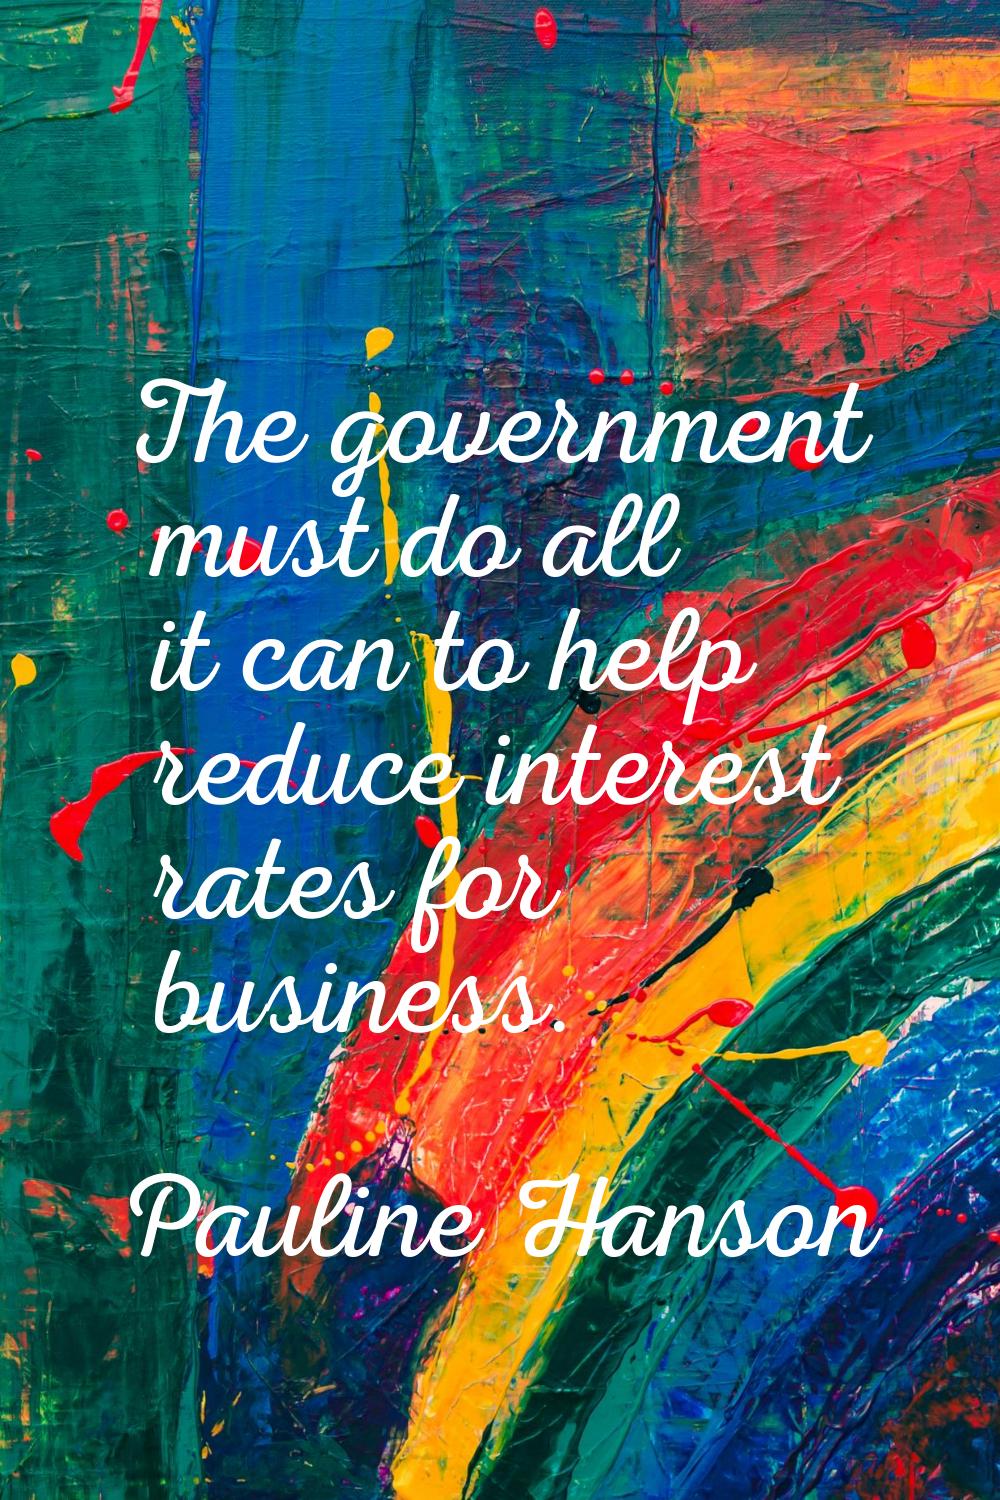 The government must do all it can to help reduce interest rates for business.